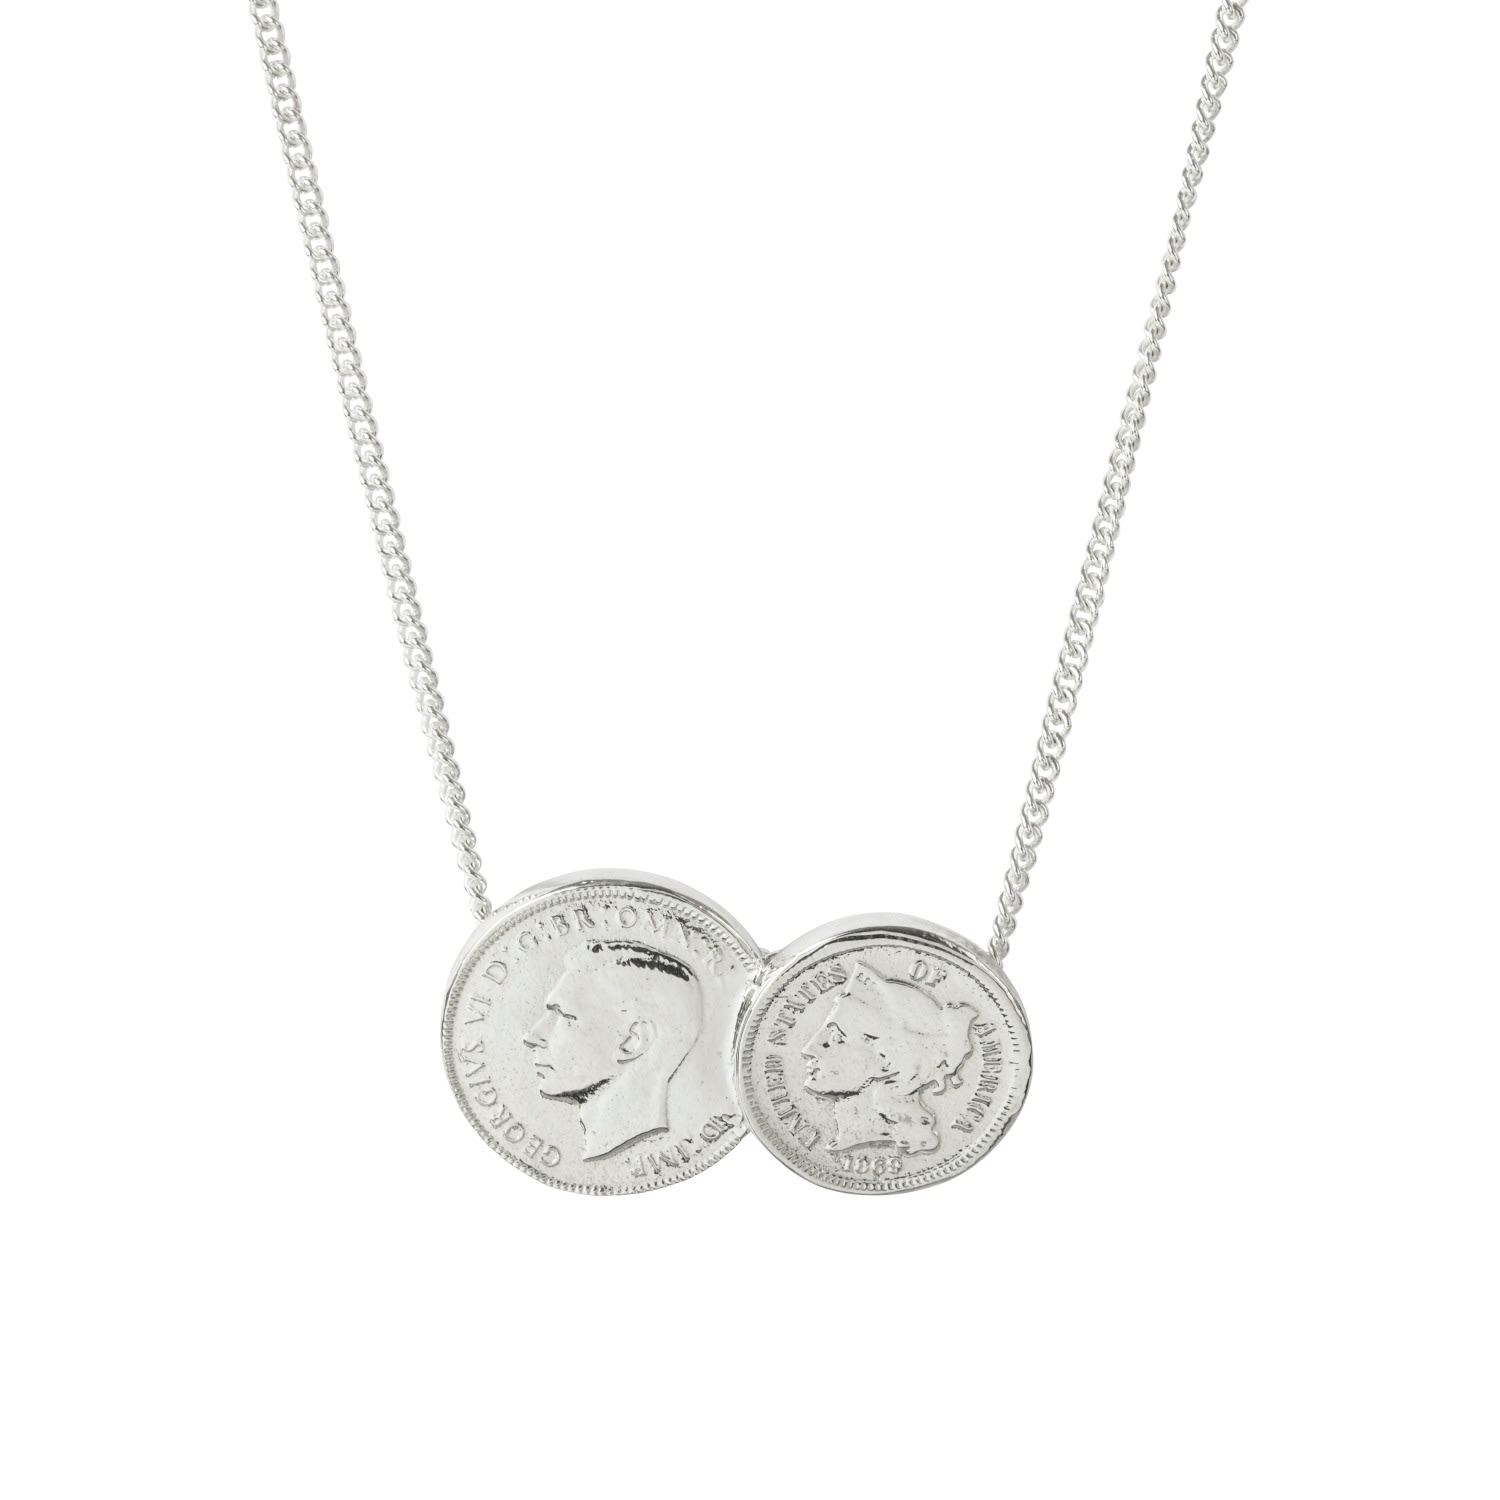 Women’s American / English Silver Double Coin Necklace Katie Mullally